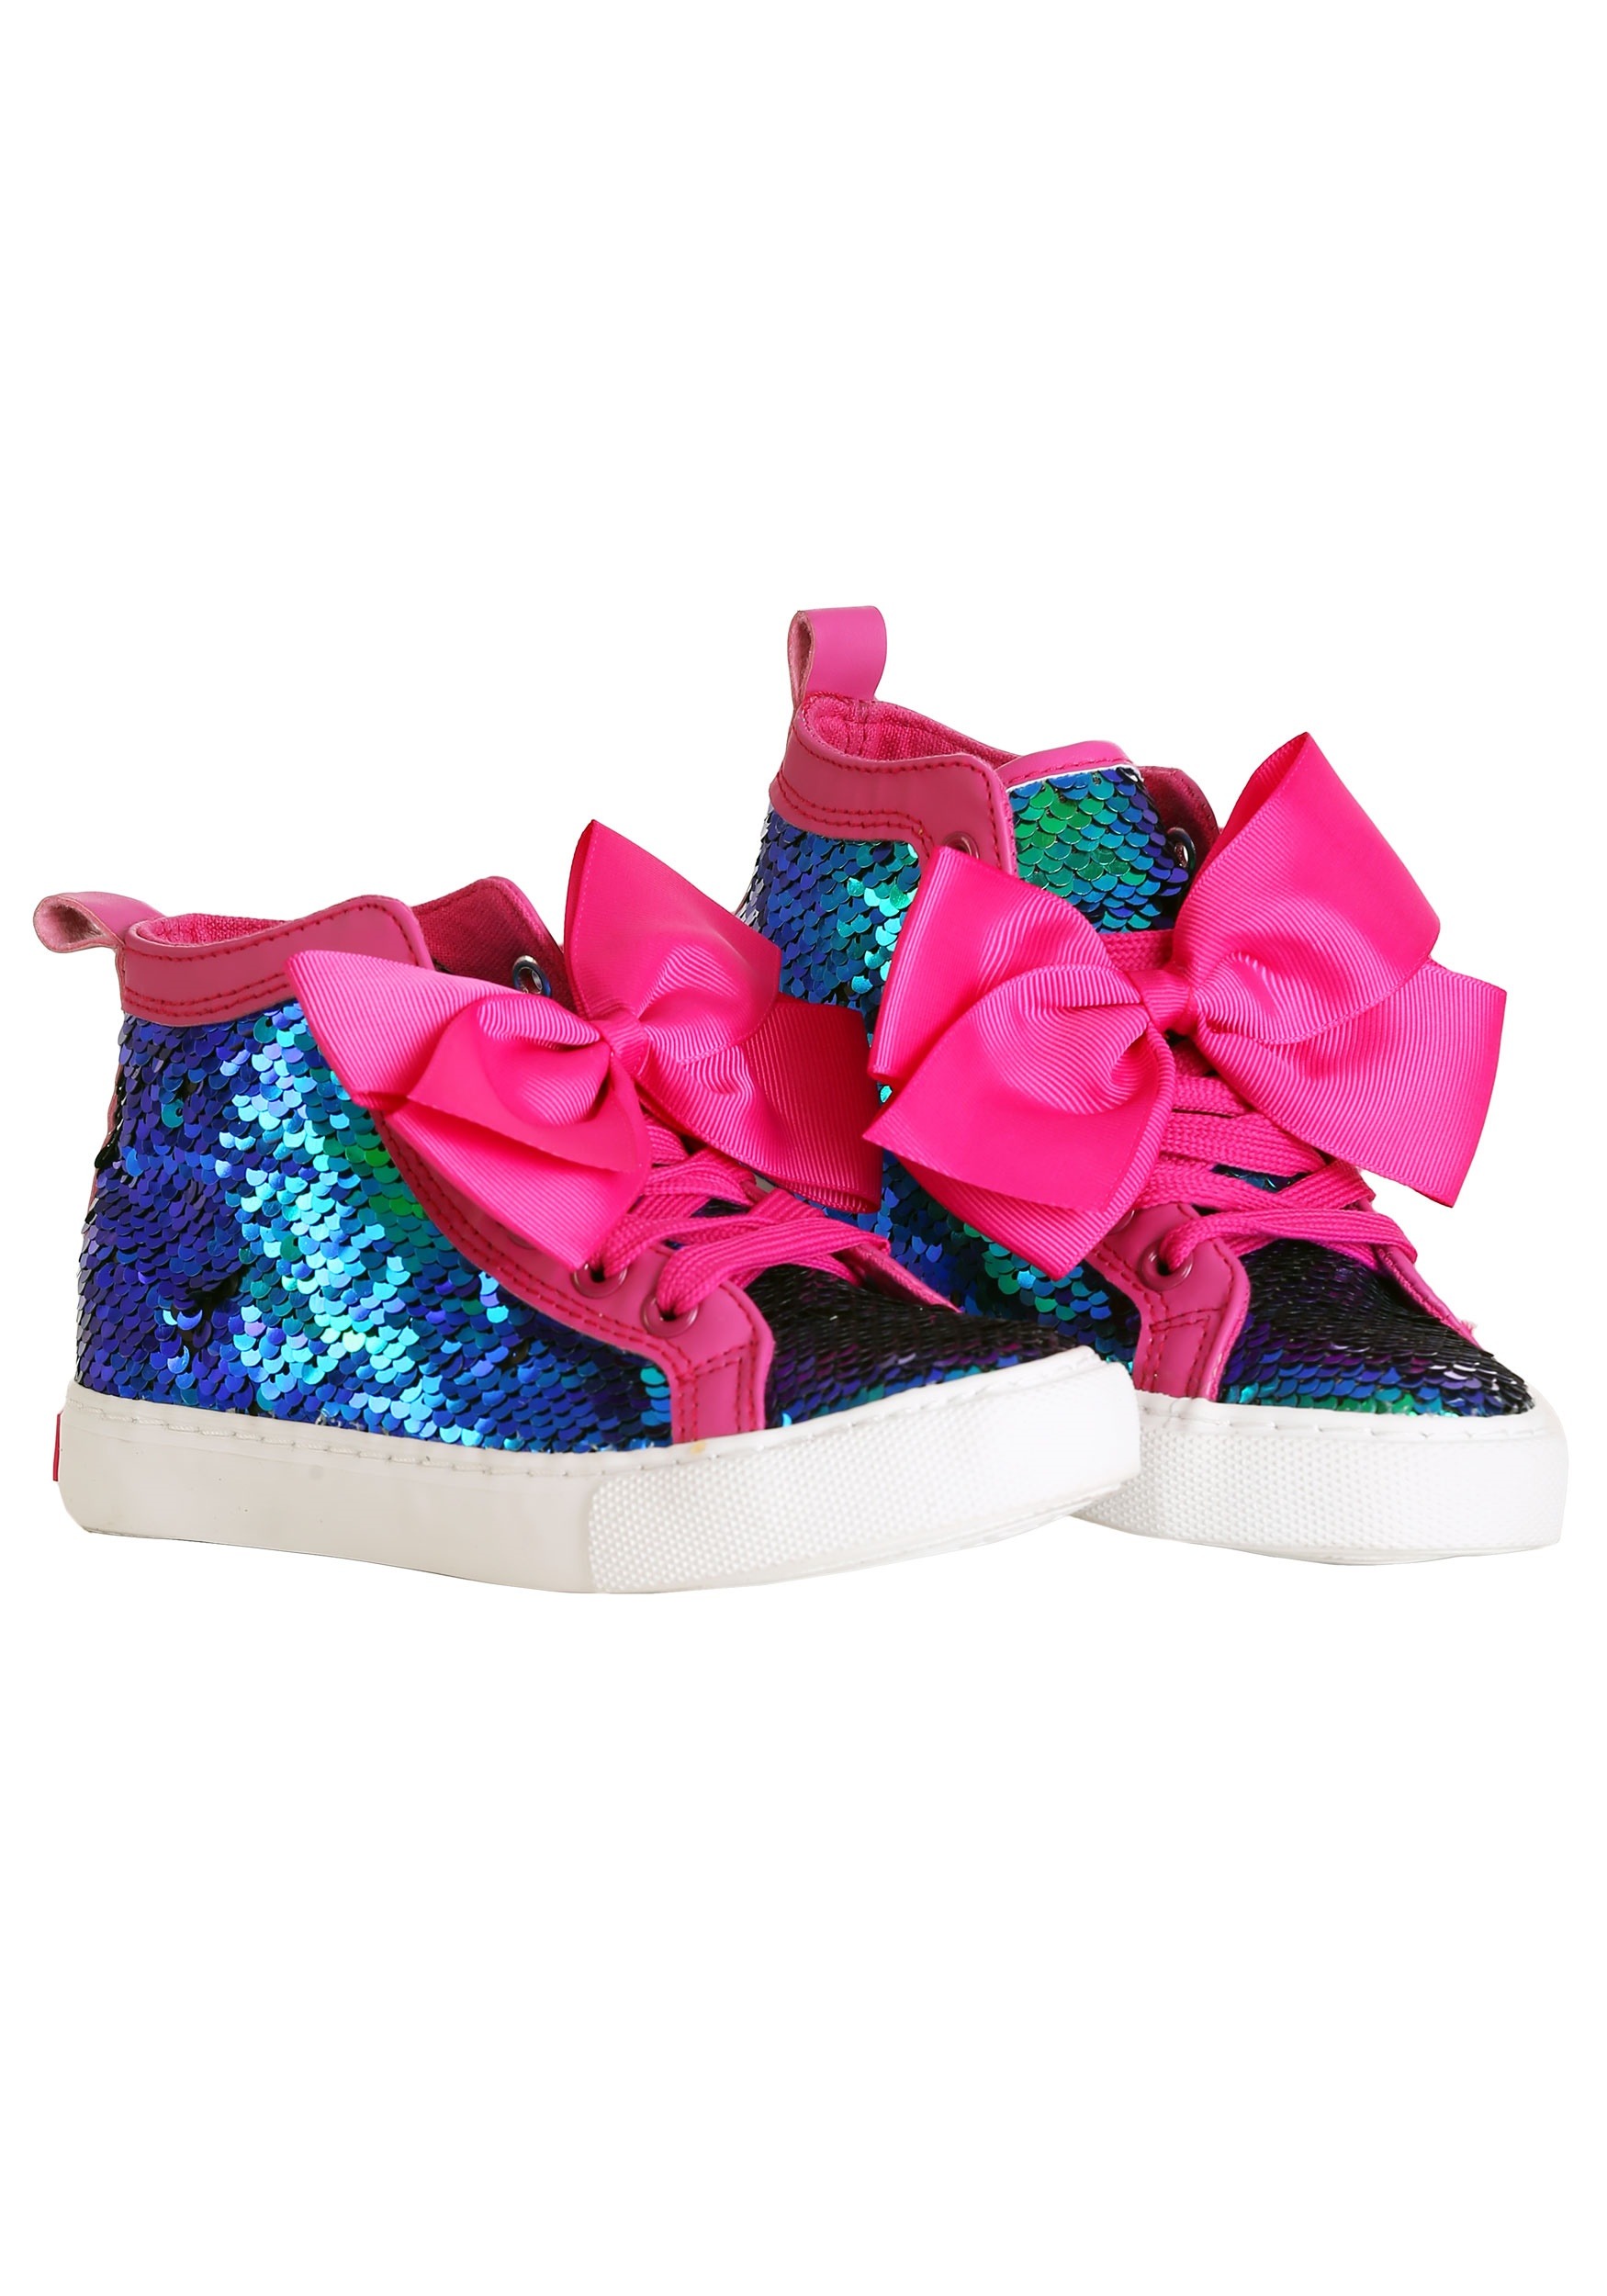 JoJo Siwa Sequined Sneakers with Pink Bows